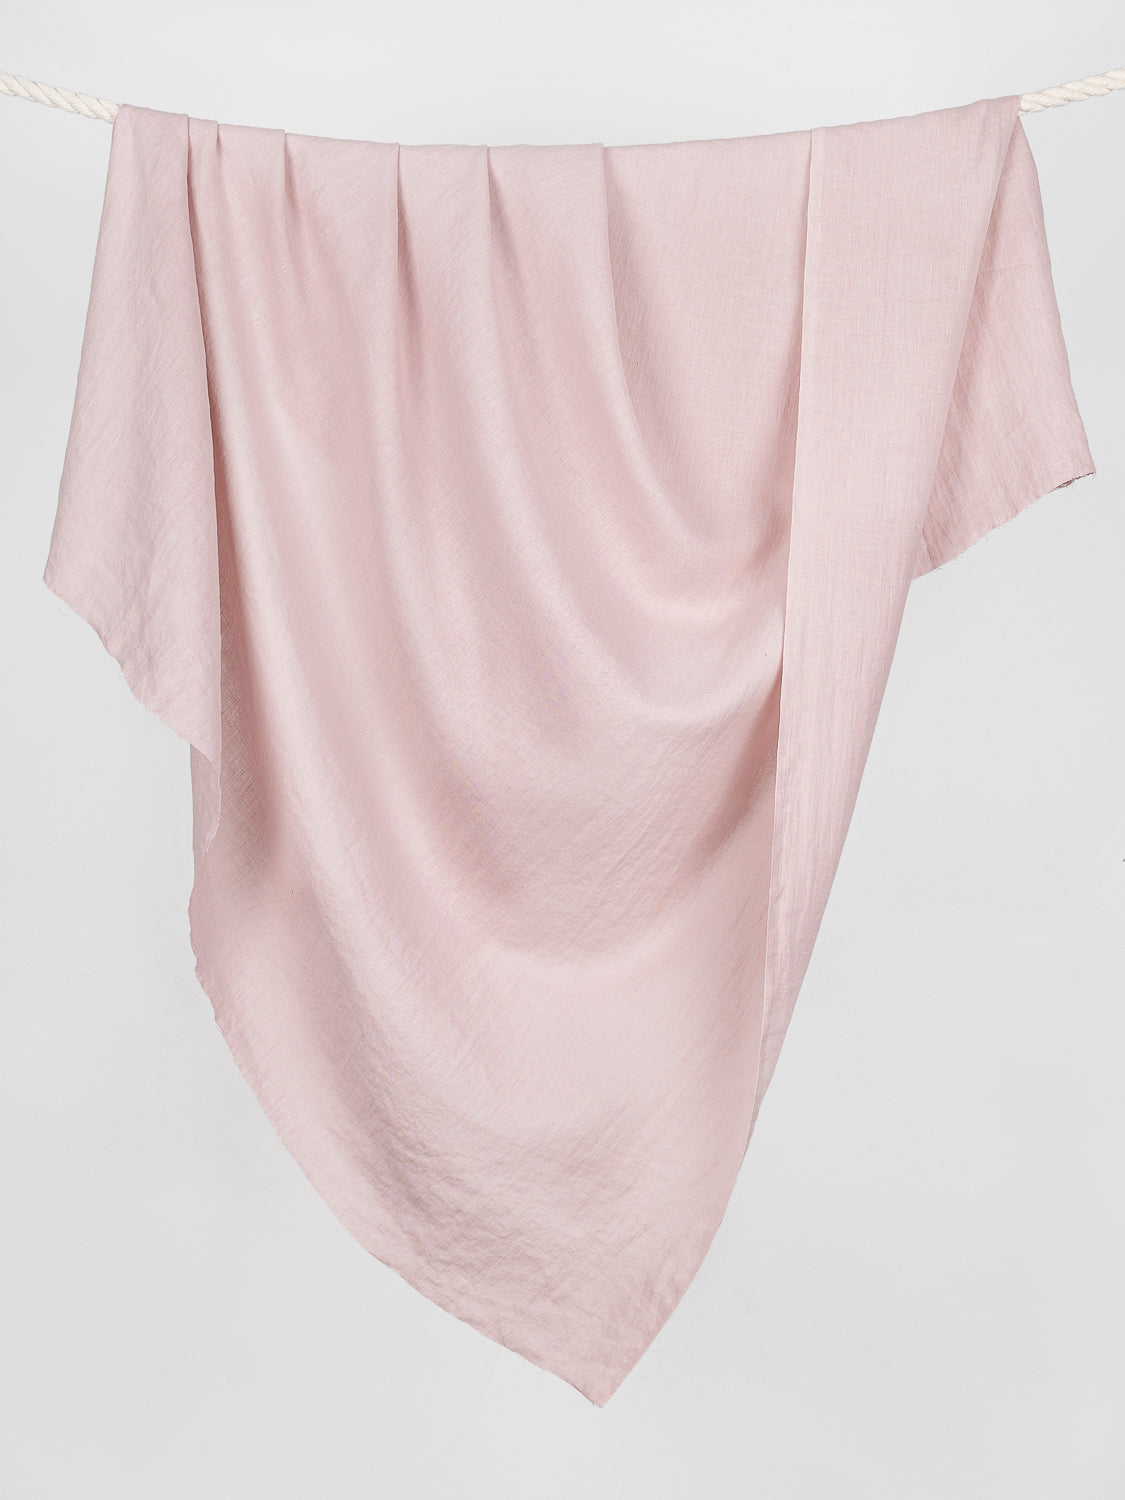 Midweight Core Collection Linen - Dusty Rose | Core Fabrics